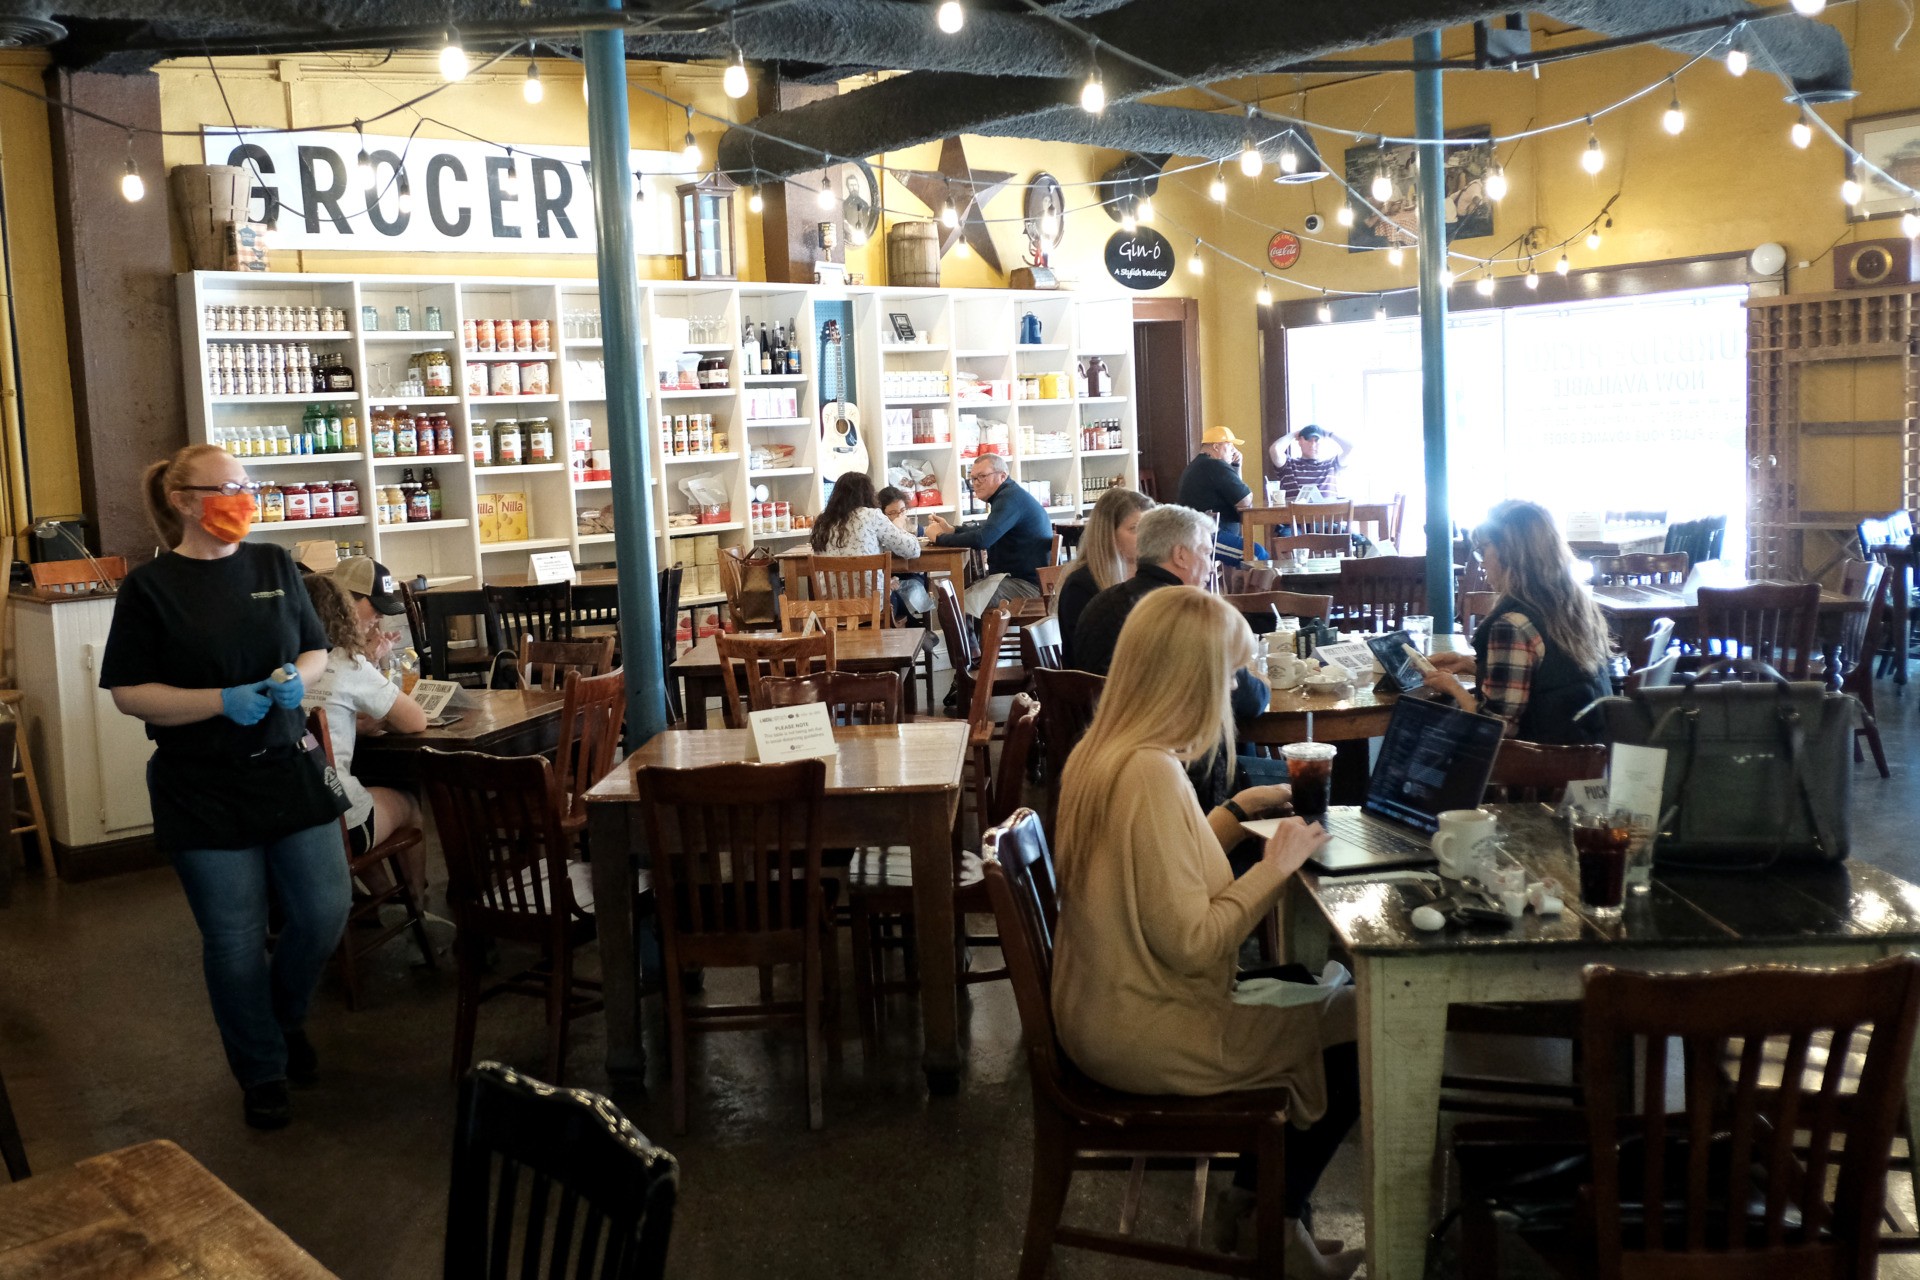 NASHVILLE, TENNESSEE - APRIL 27: Customers are seen at Puckett's Grocery & Restaurant on April 27, 2020 in Franklin, Tennessee. Tennessee is one of the first states to reopen restaurants after the onset of the coronavirus (COVID-19). Restaurants are allowed to open at 50% capacity and maintain social distancing. (Photo by Jason Kempin/Getty Images)